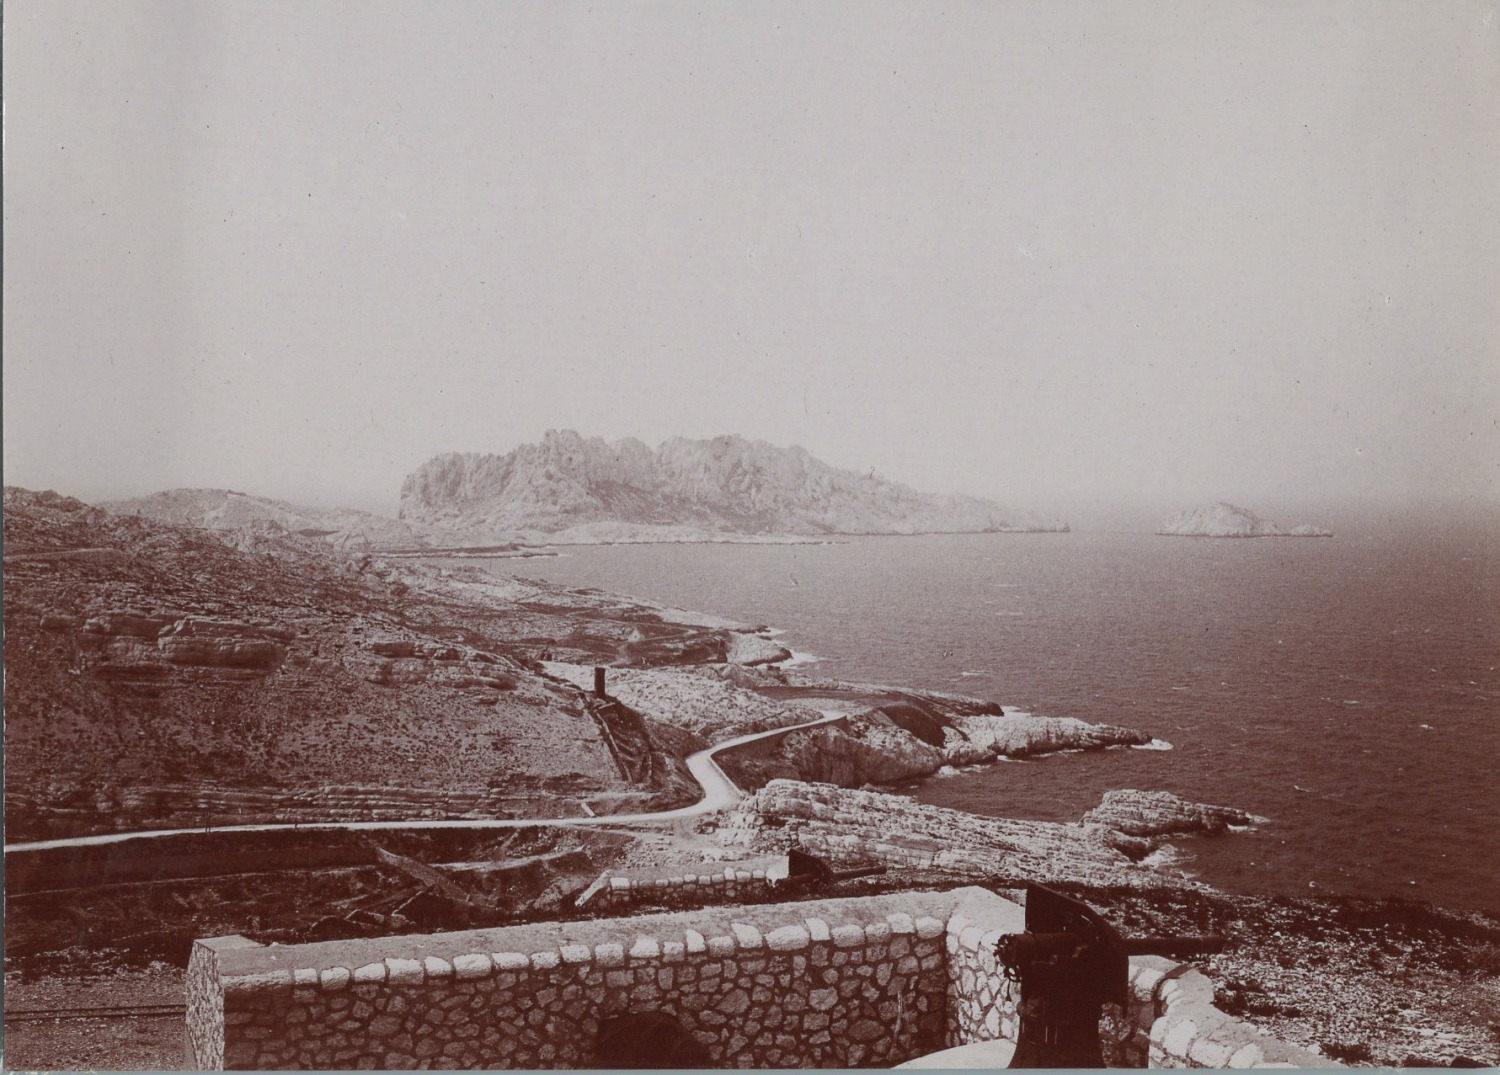 France, Marseille, view taken from the Mont Rose battery on Maire Vi Island